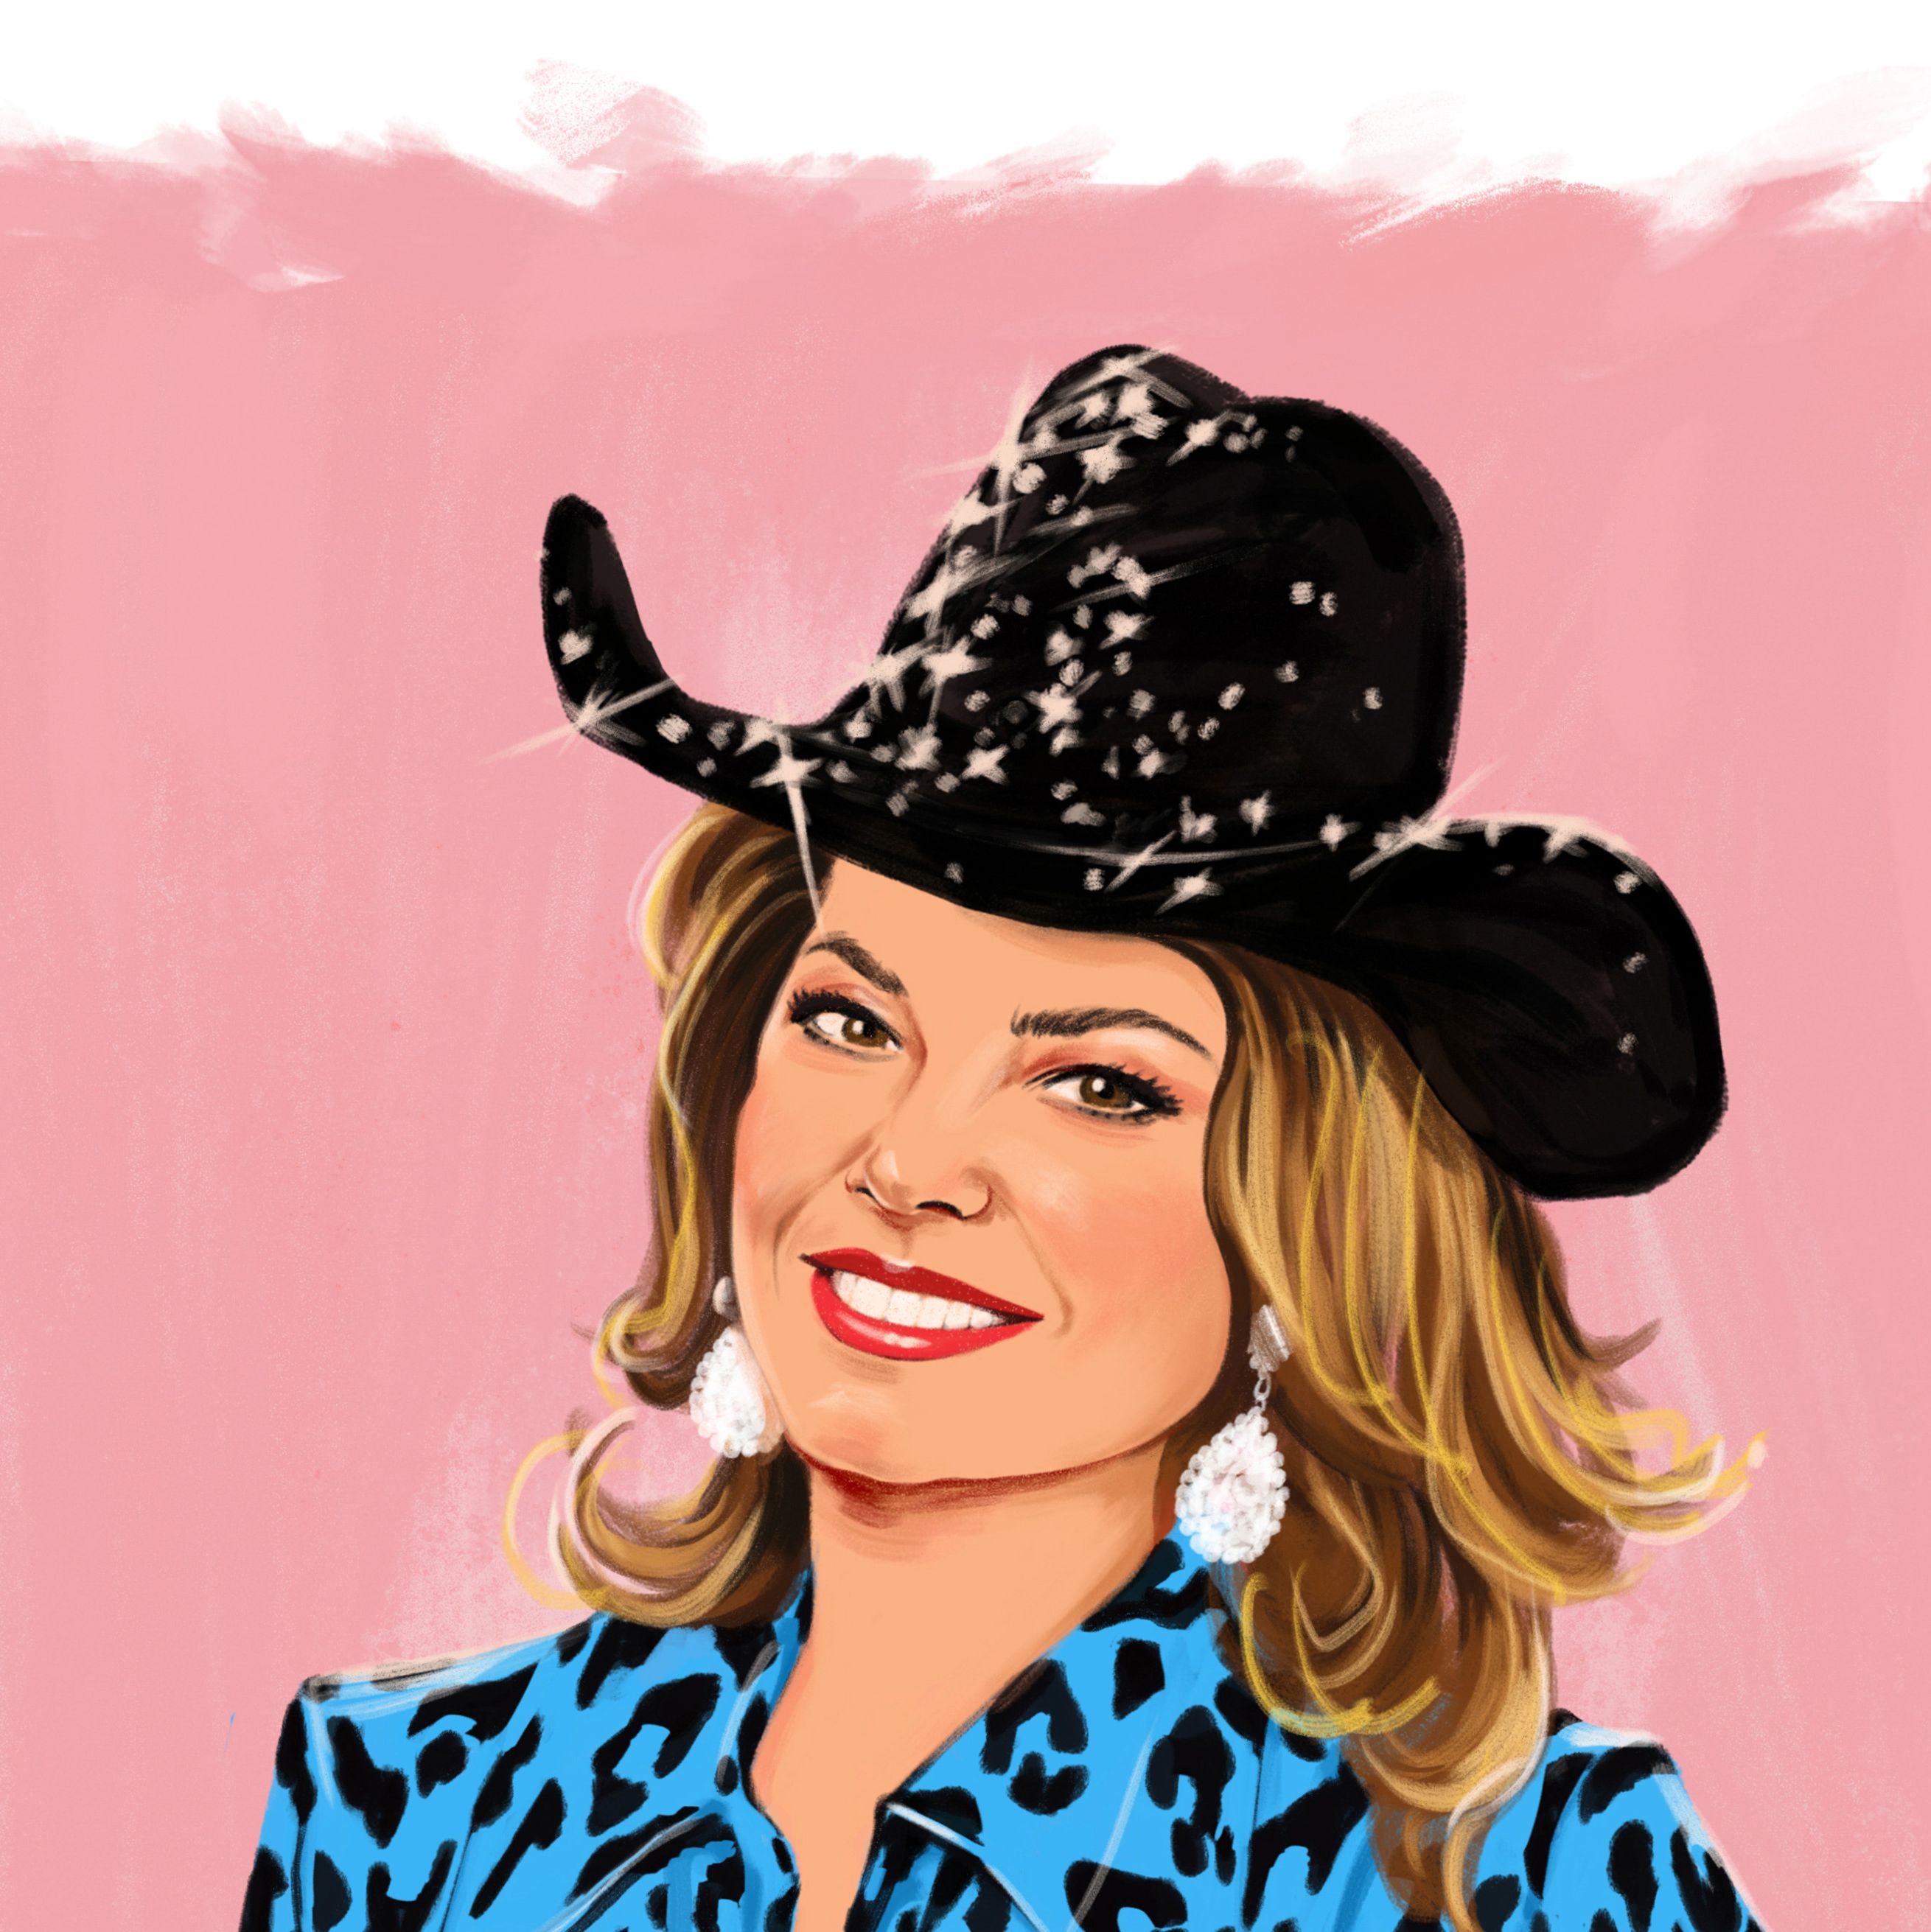 Only a handful of women have successfully merged high fashion and the American frontier: TV cowgirl Dale Evans and her signature white boots, Dolly Parton's hand-embroidered Nudie Cohn suits, Beyoncé in a black Stetson hat. In 1998, country-pop singer Shania Twain left her mark on Western wear with a hooded leopard one-piece in the 